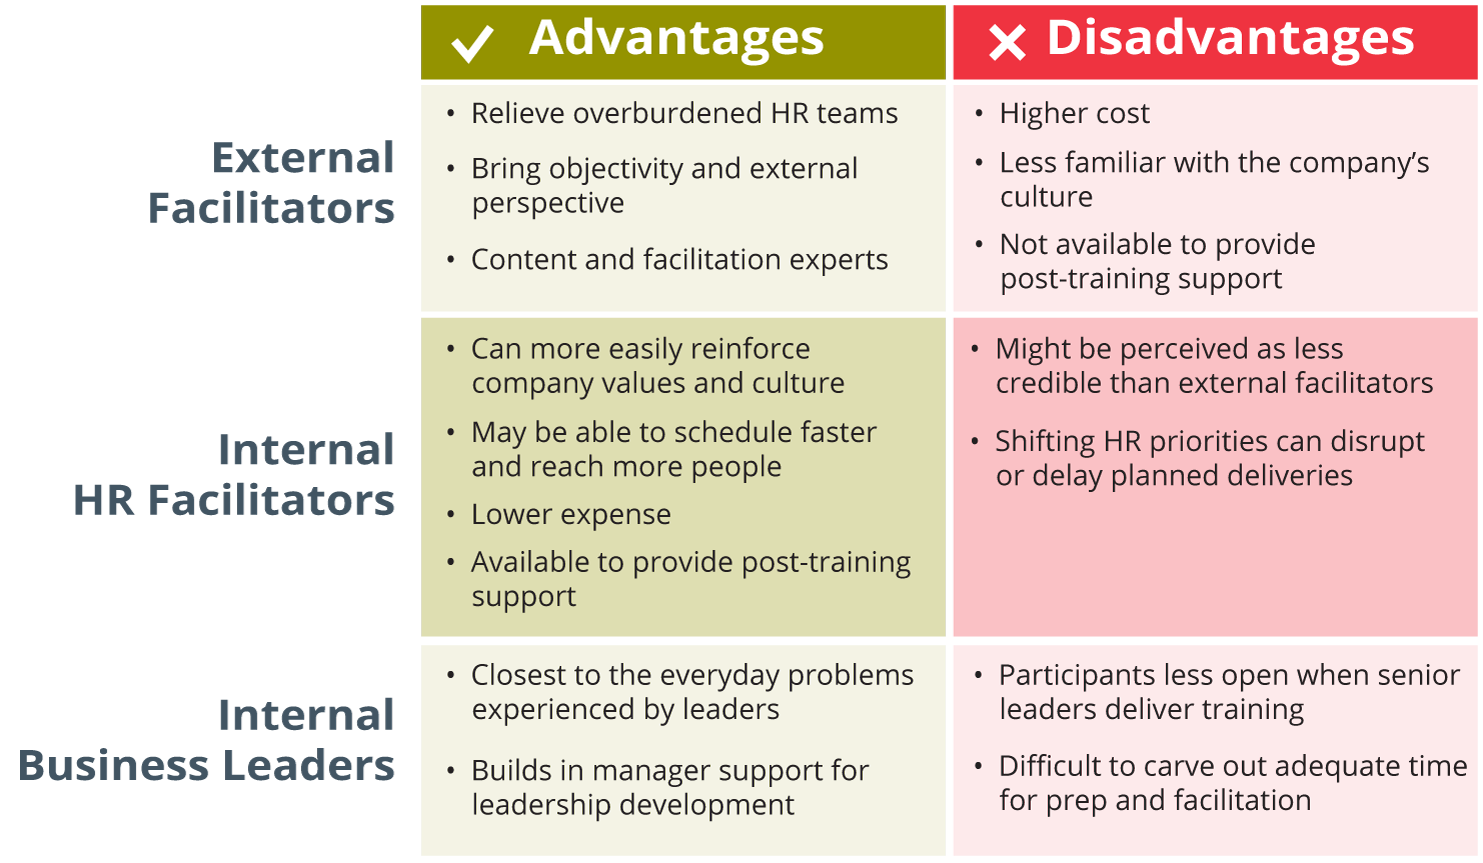 advantages and disadvantages of using external leadership facilitators, internal leadership facilitators, and internal business leaders as facilitators, for example, an advantage of using internal leadership facilitators is the lower expense, but the disadvantage is shifting HR priorities can disrupt or delay planned deliveries